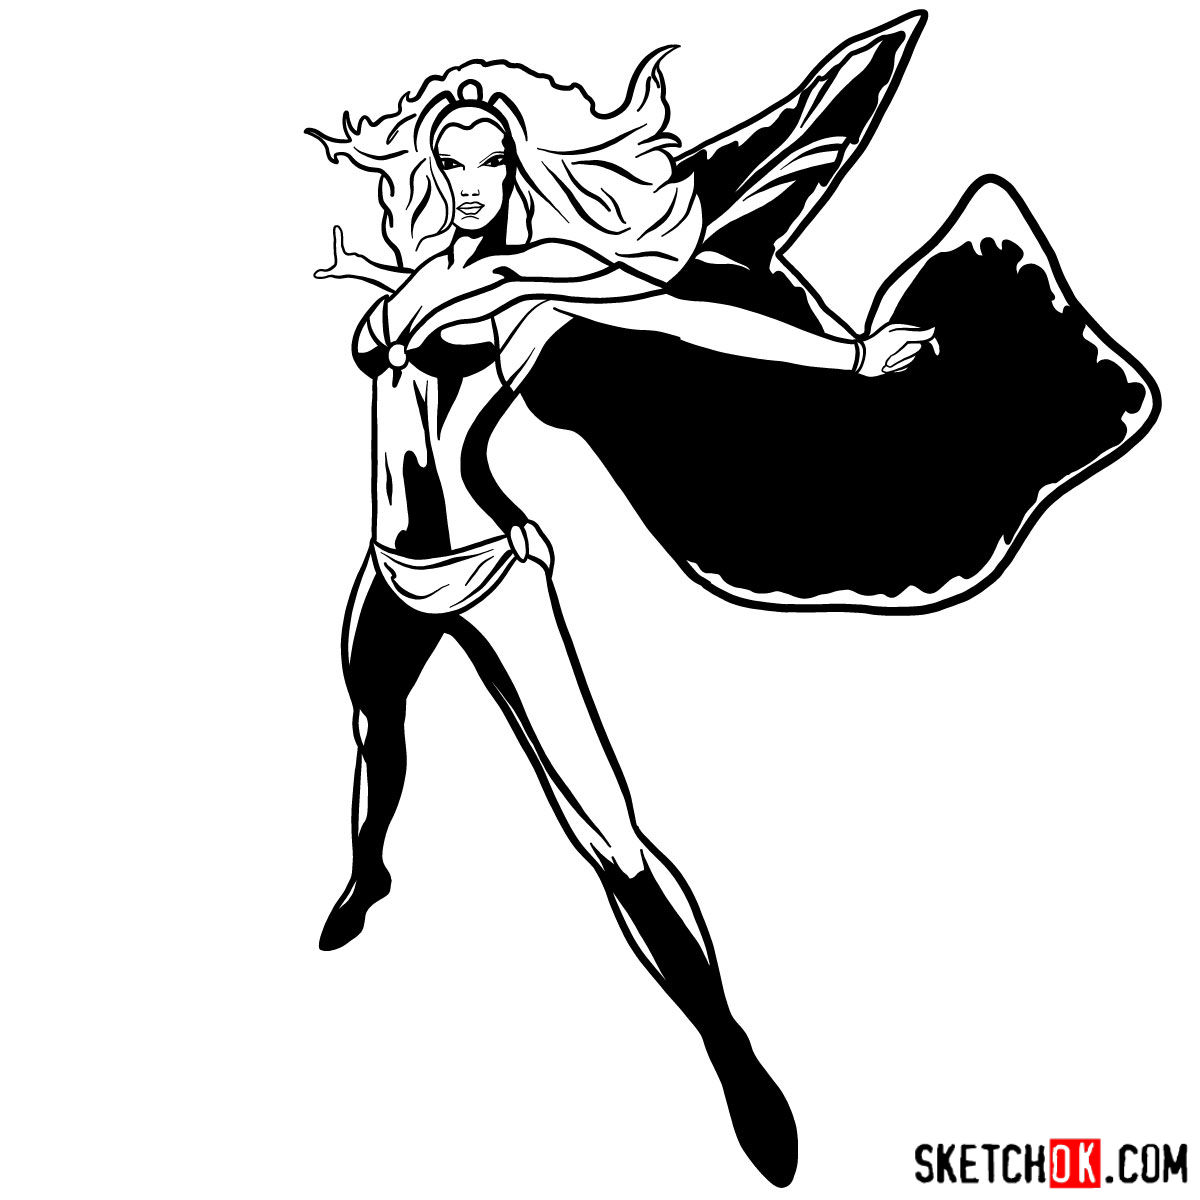 How to draw Storm from X-Men - step 16